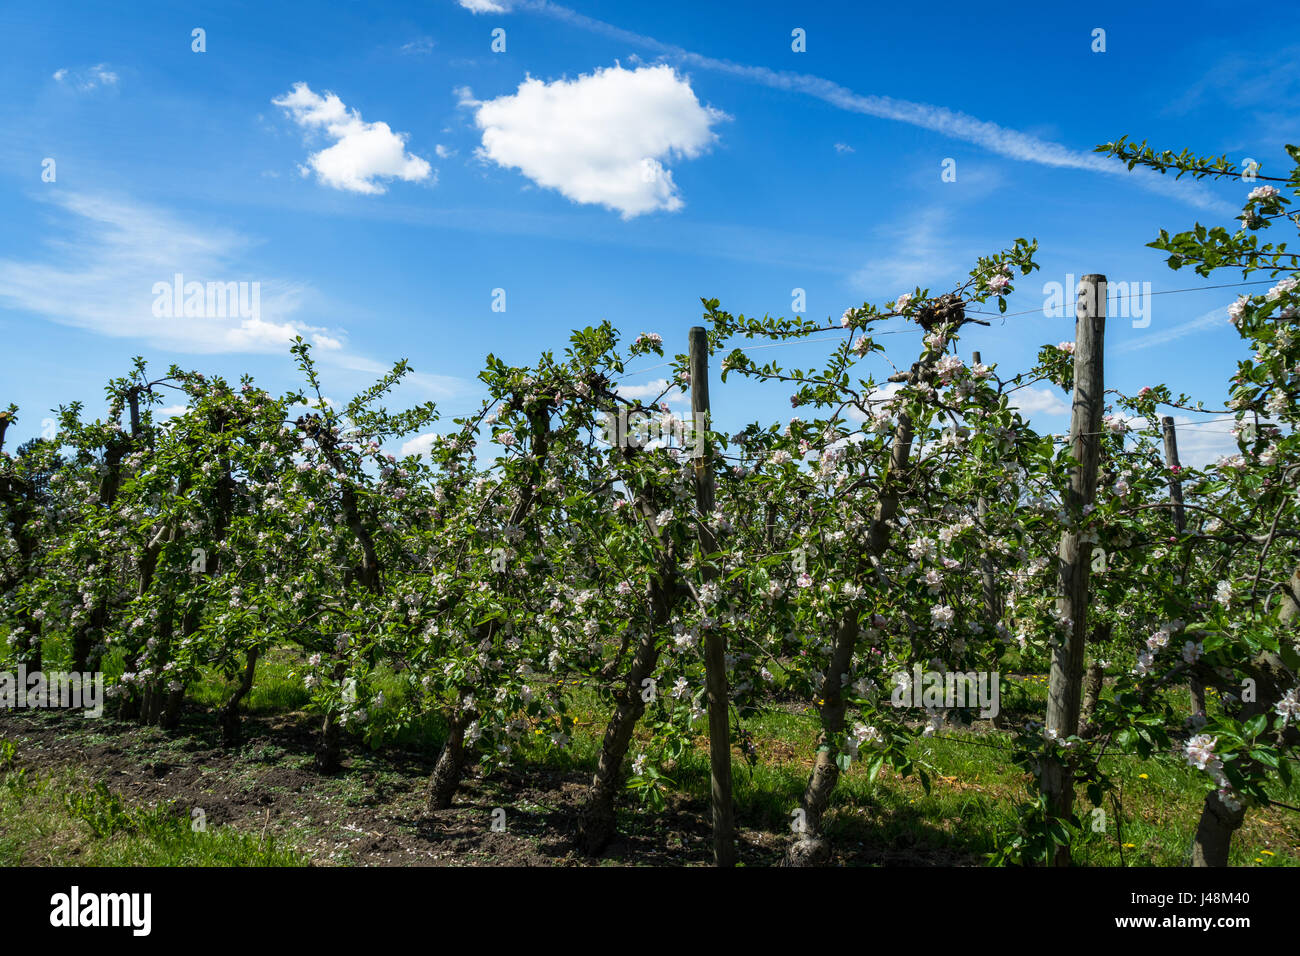 Blooming apple trees in Altes Land near Hamburg, Germany, the biggest contiguous fruit-producing region in Central Europe Stock Photo